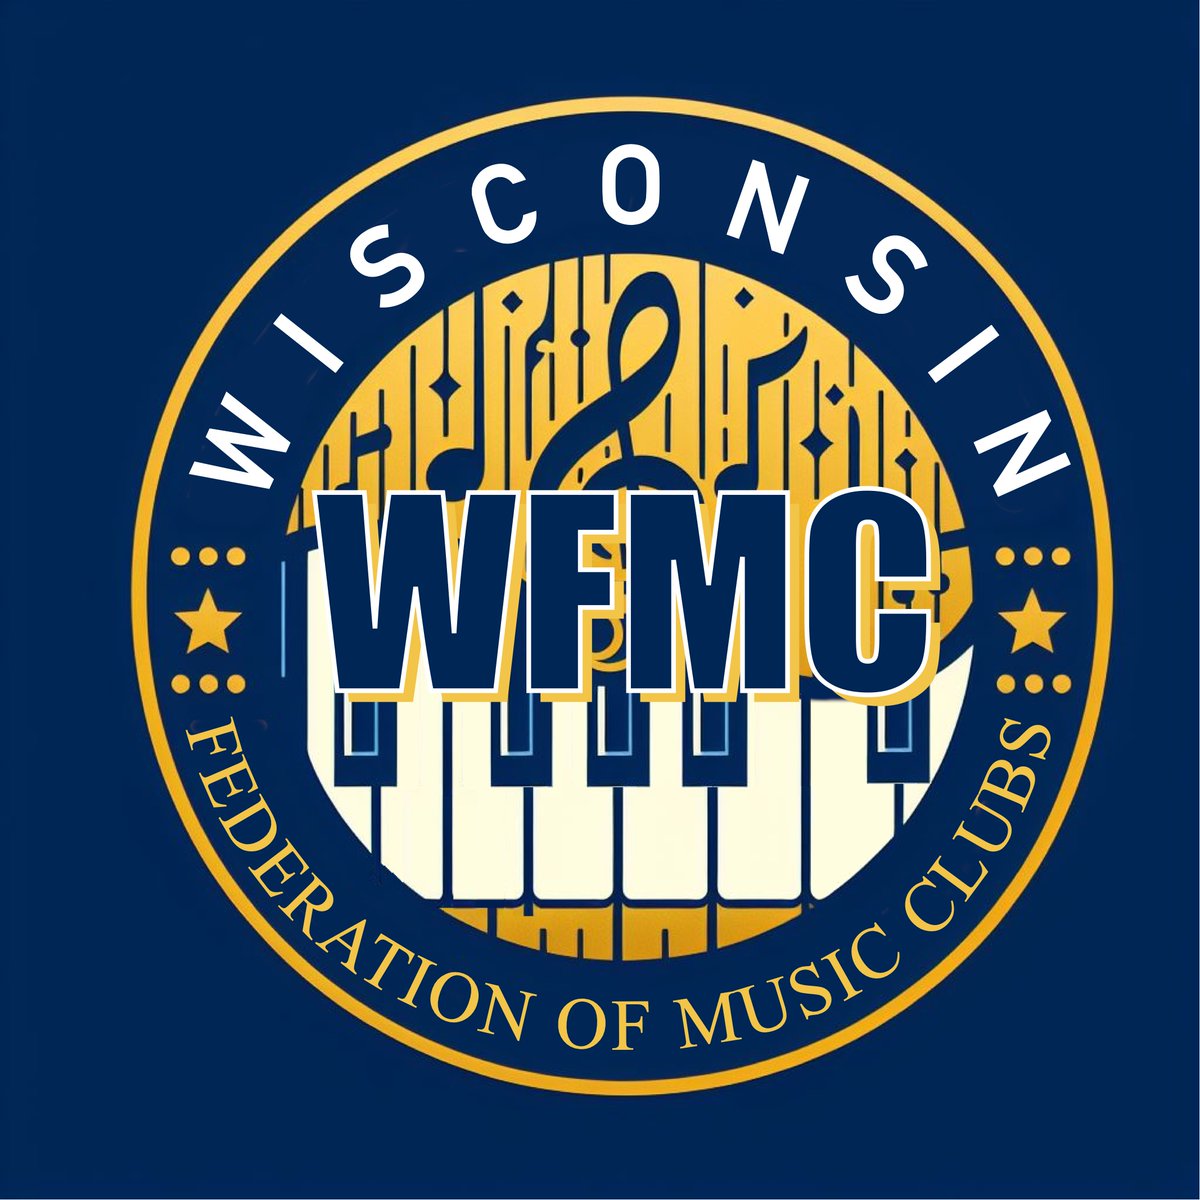 WFMC High Achievement Award Applications are due March 15th. Apply today! The Application form is here: wfmc-music.org/wp-content/upl… #WFMC #NFMC #Federation #WisconsinFederationofMusicClubs #MusicClub #MusicScholarship